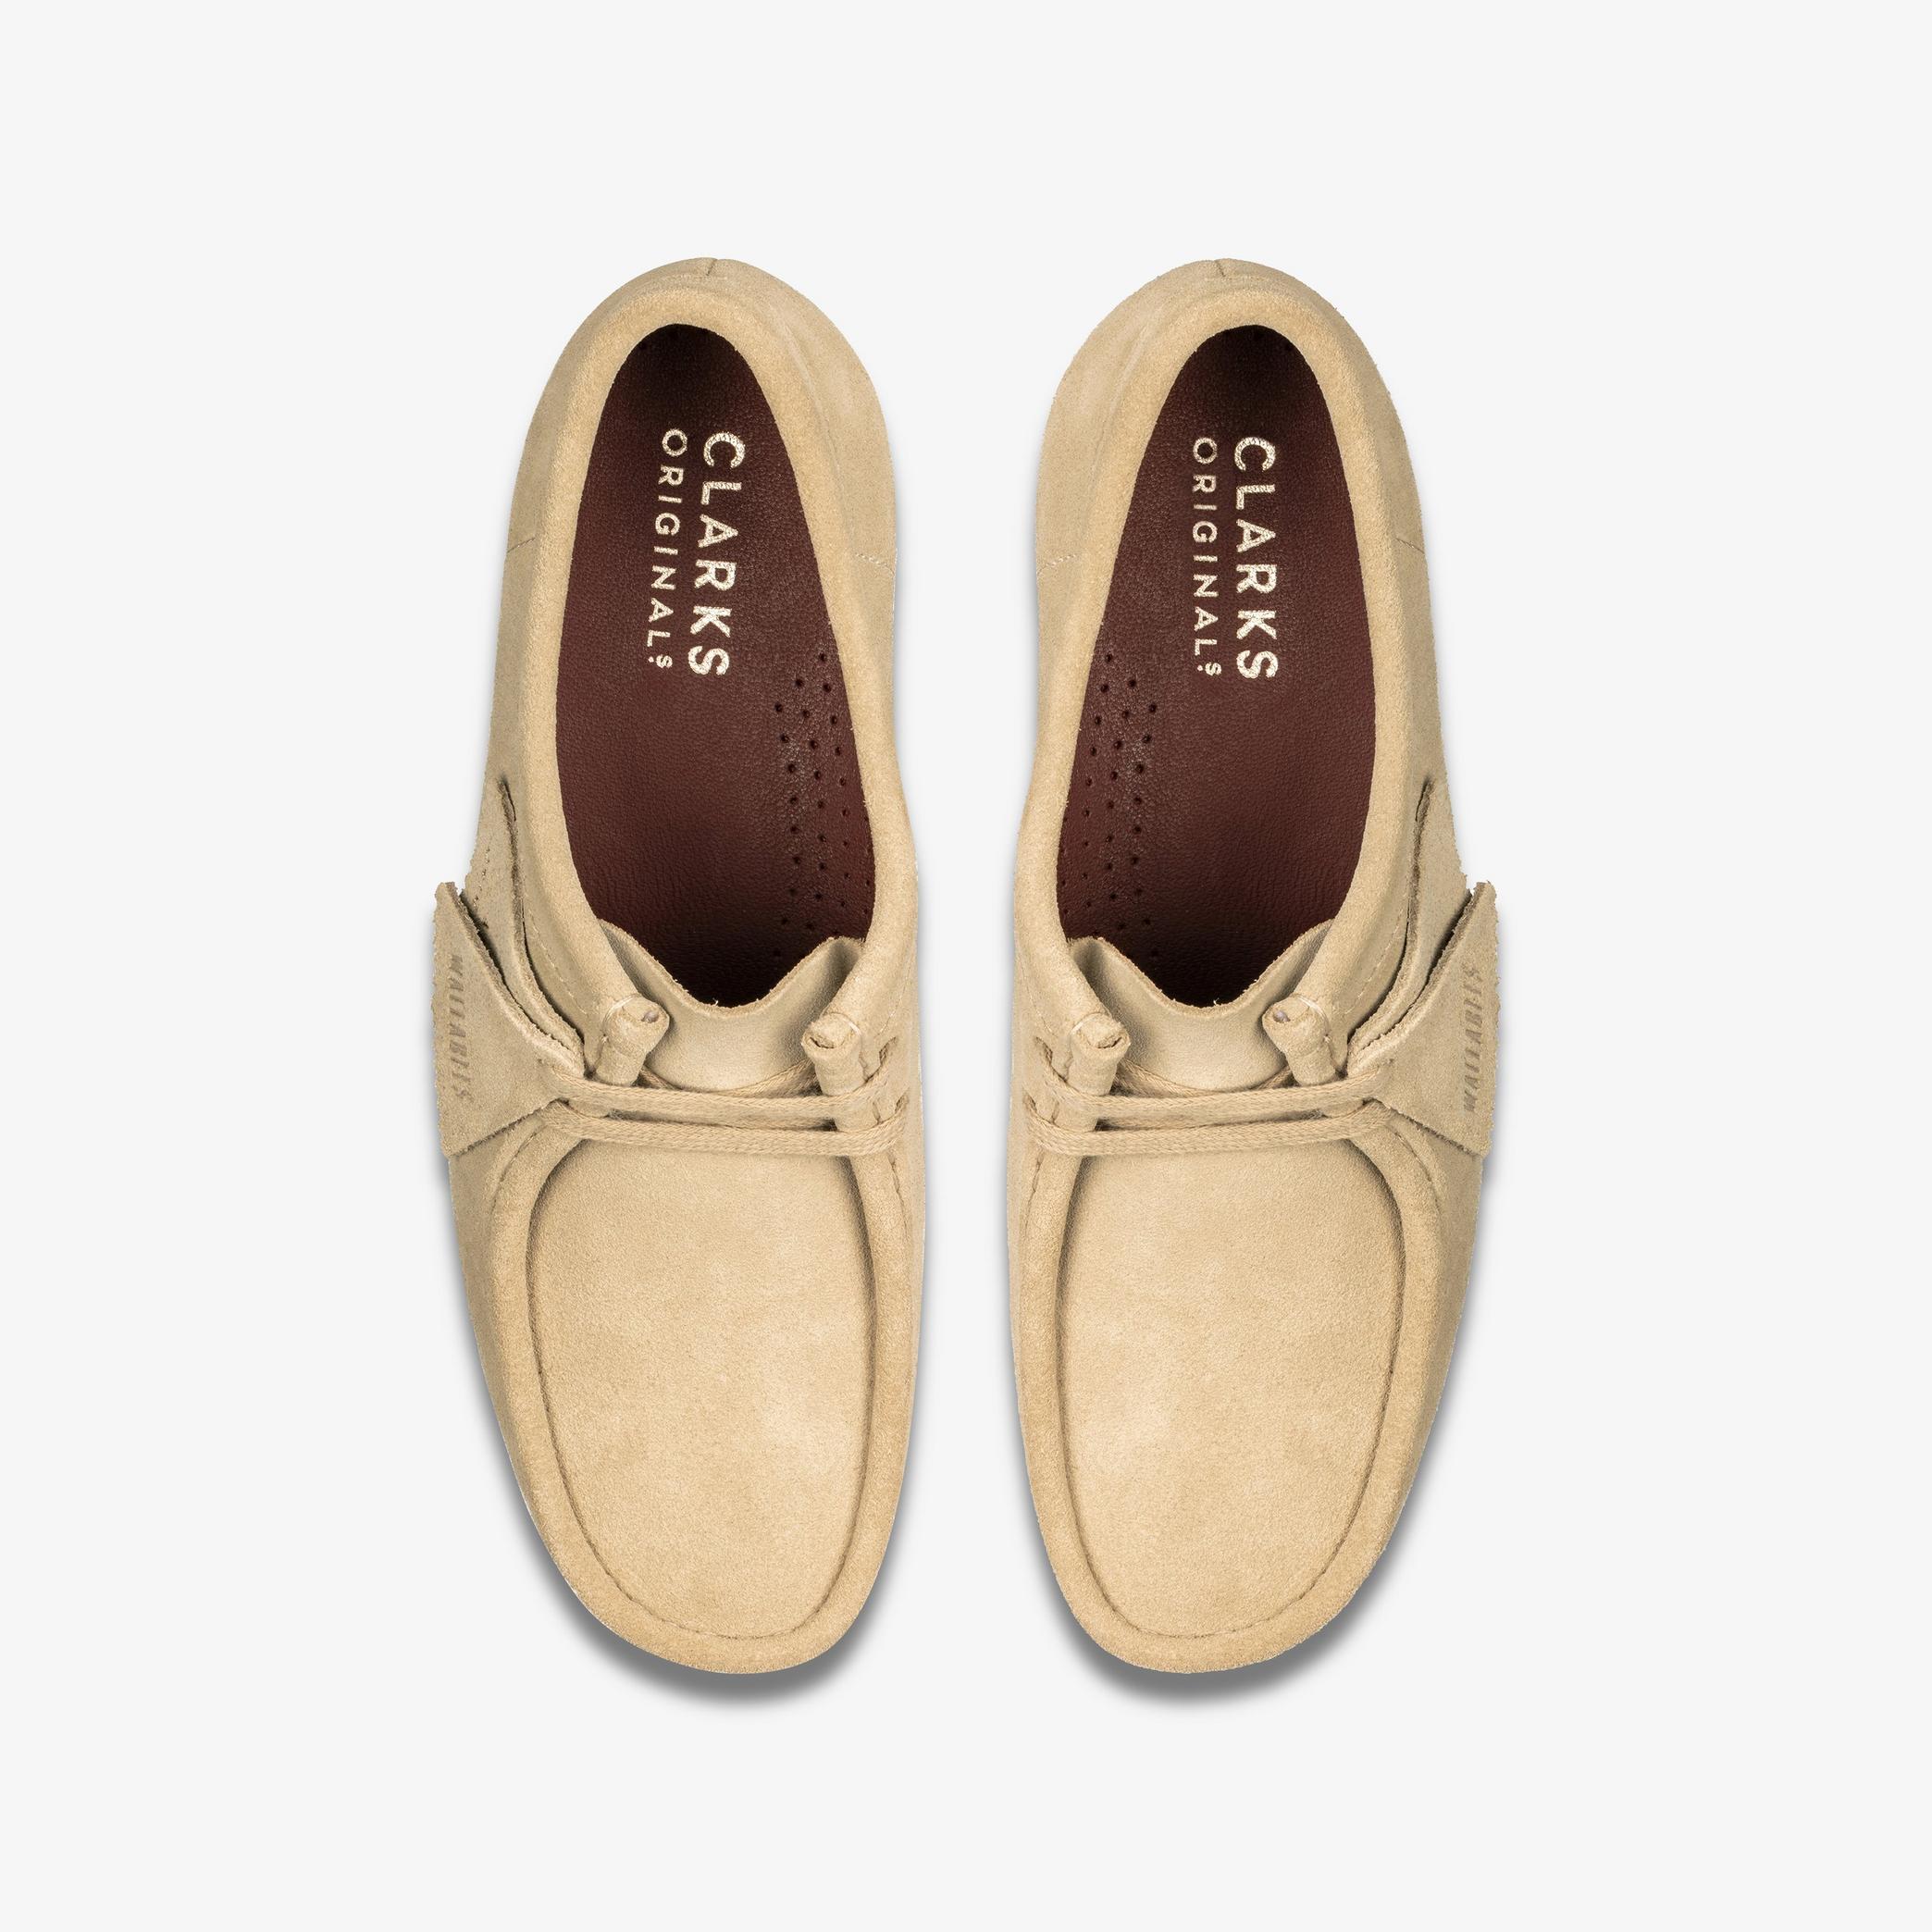 Wallabee Maple Suede Shoes, view 6 of 6